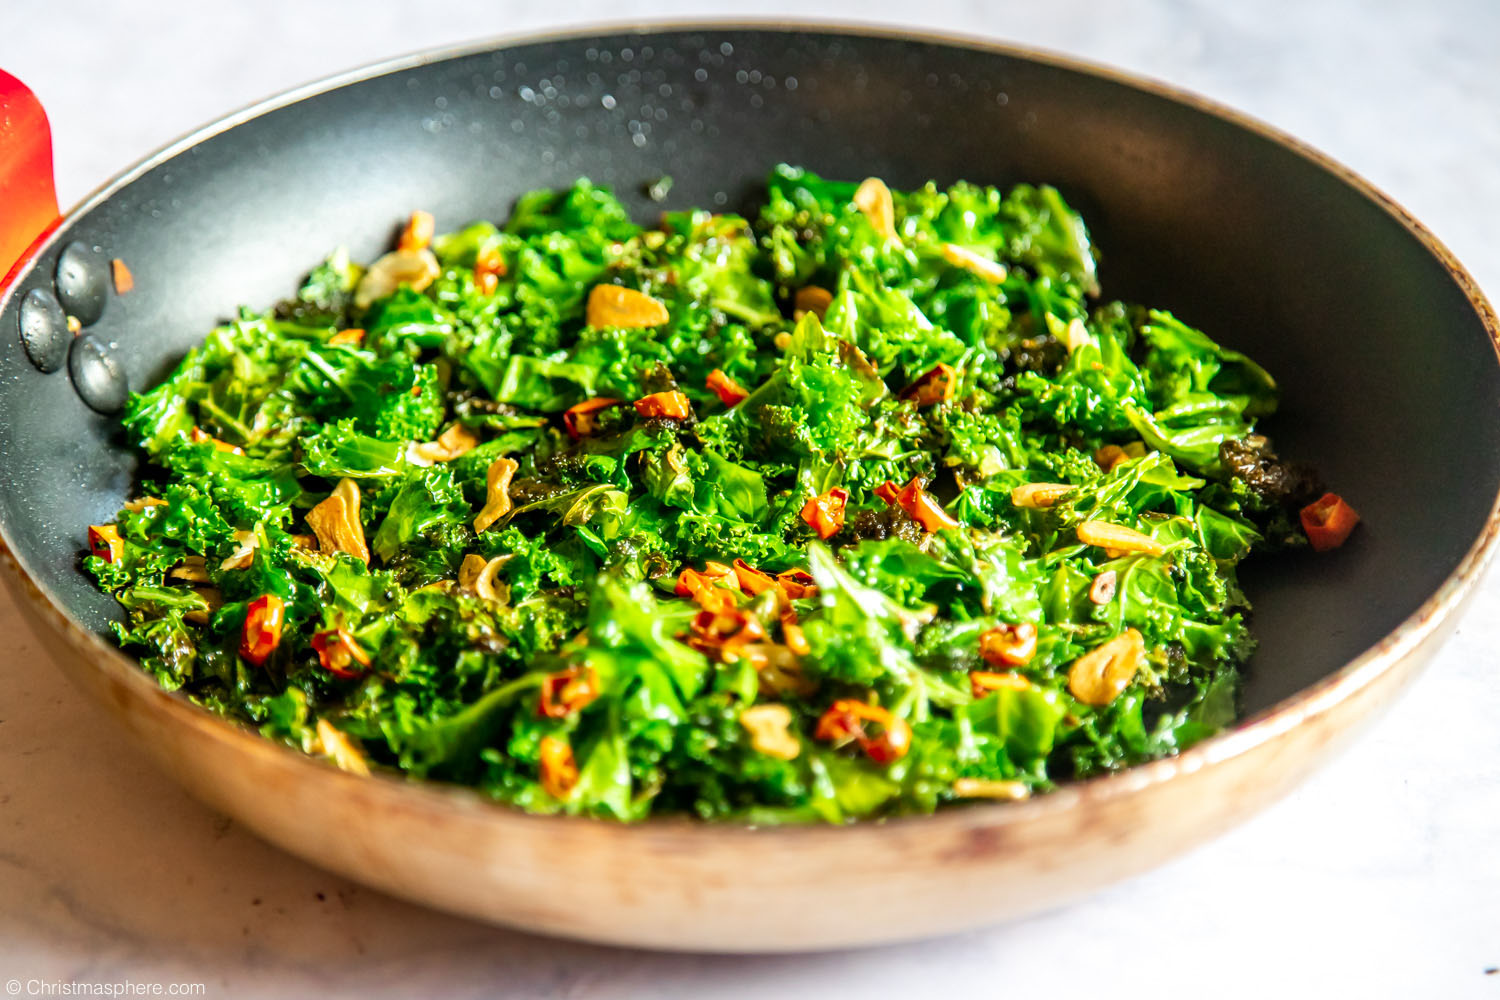 Chilli and garlic-spiced kale crisps